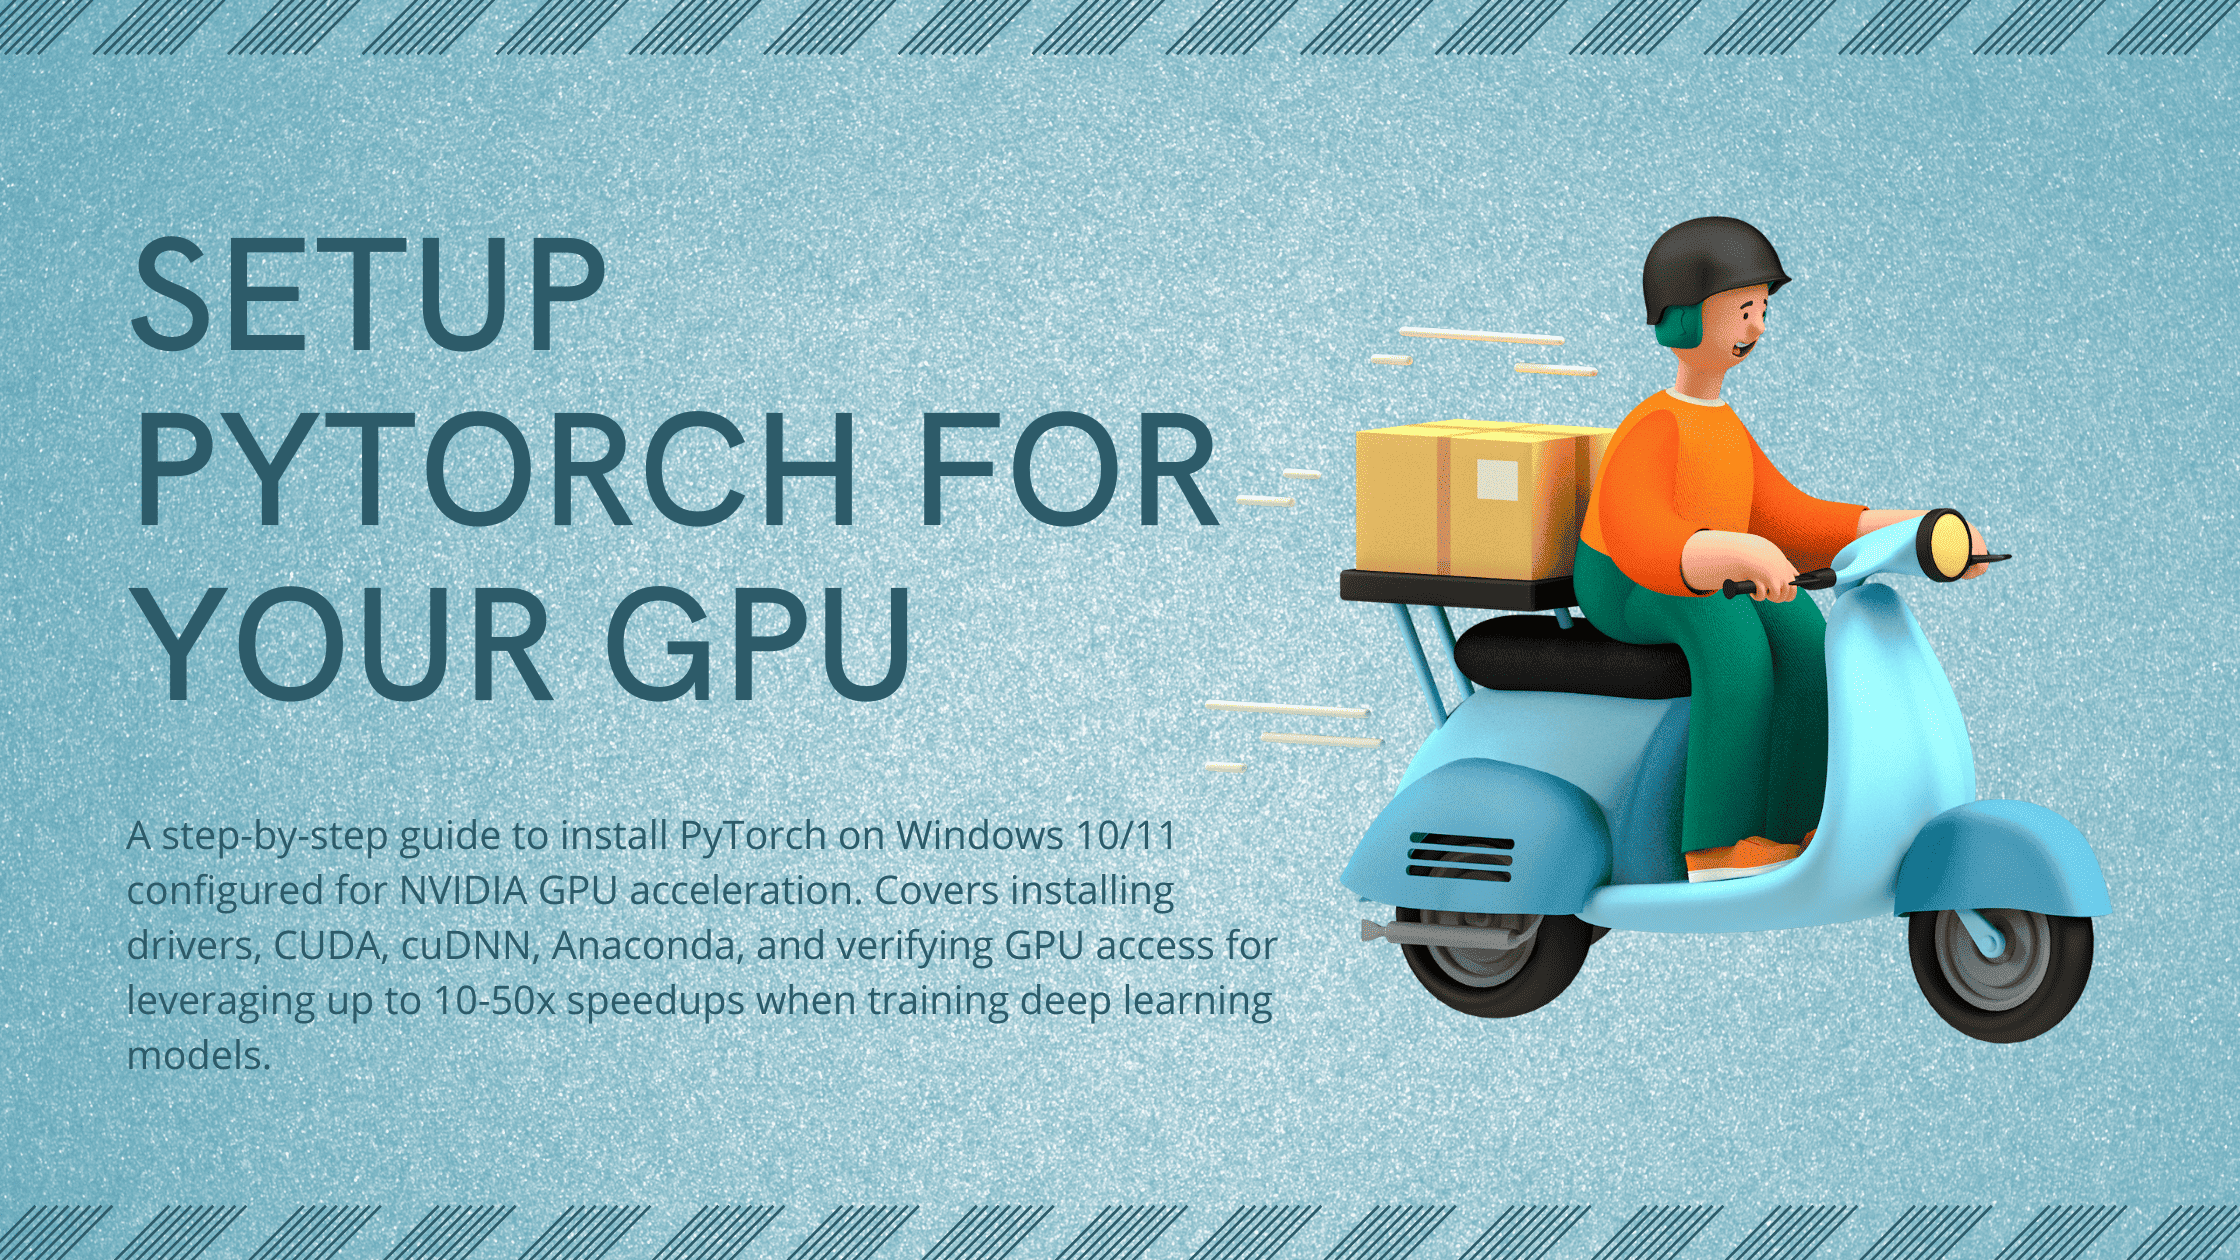 Step By Step Guide To Setup Pytorch For Your Gpu On Windows 10 And 11